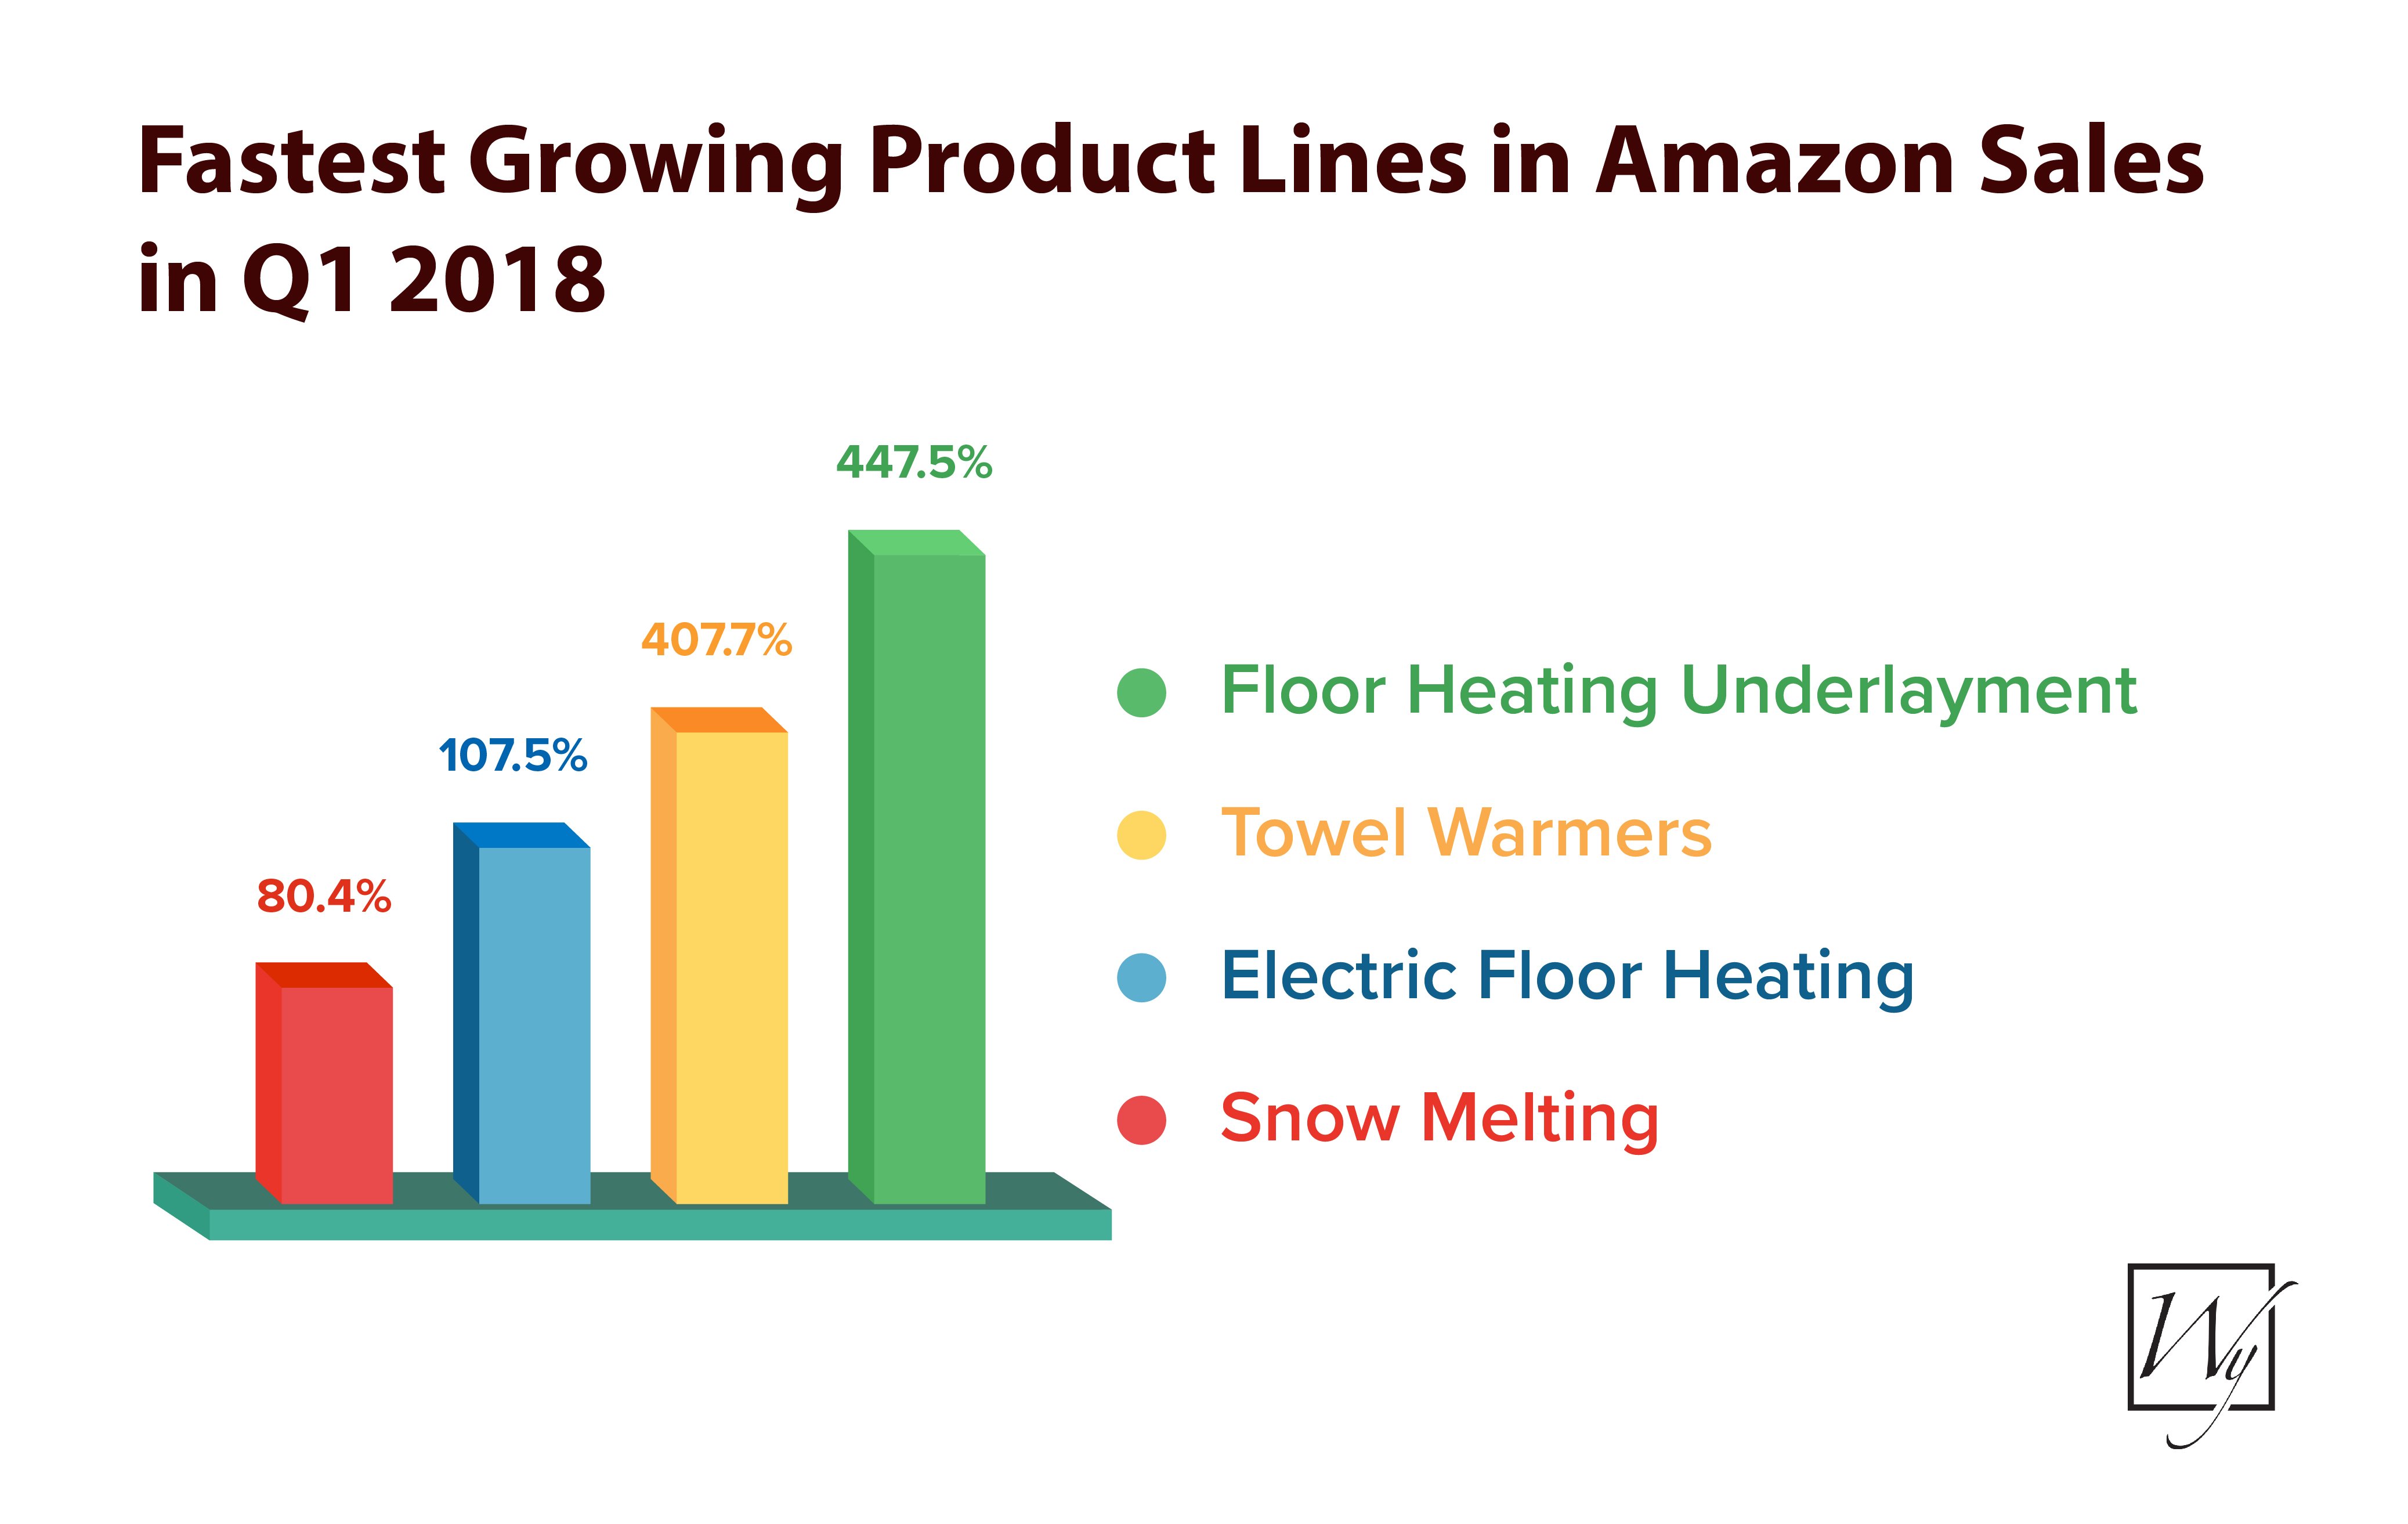 Fastest Growing Radiant Heating Product Lines in Amazon Sales in Q1 2018